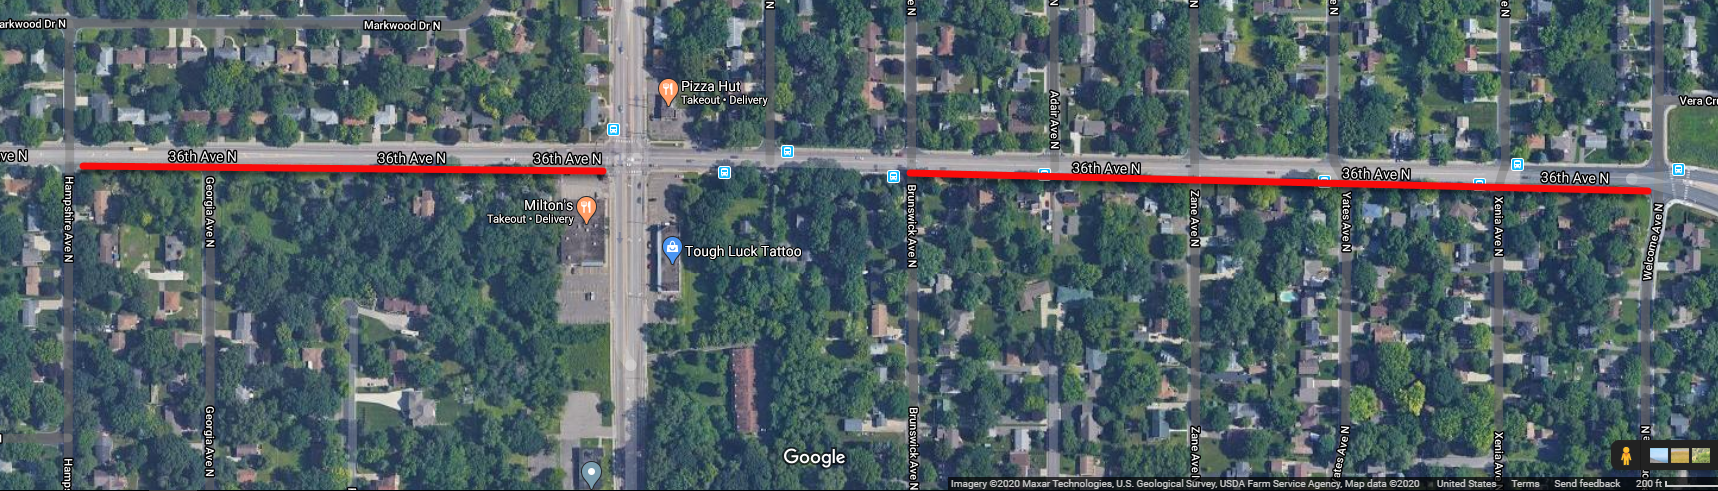 CNP Map of 36th Ave N in Crystal.png